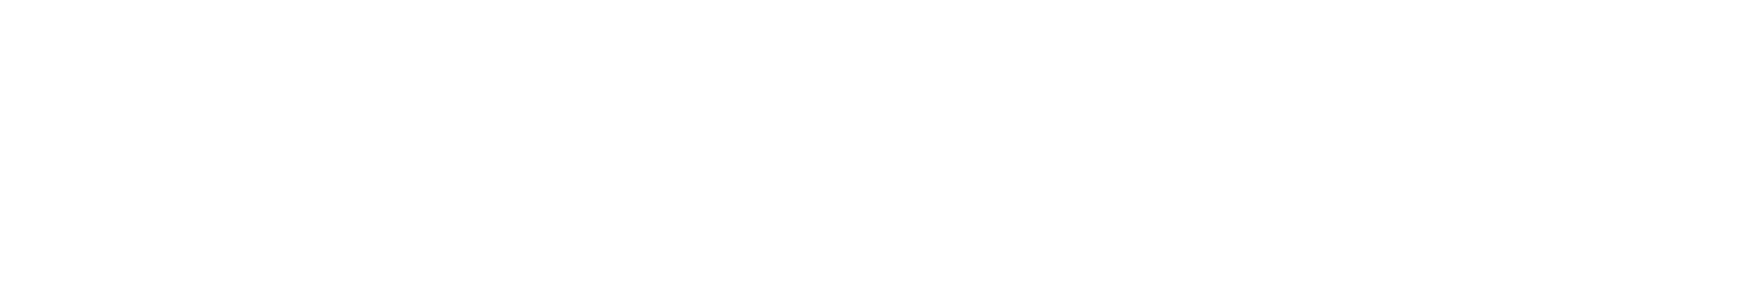 kyteway-technology-services-private-limited-logo